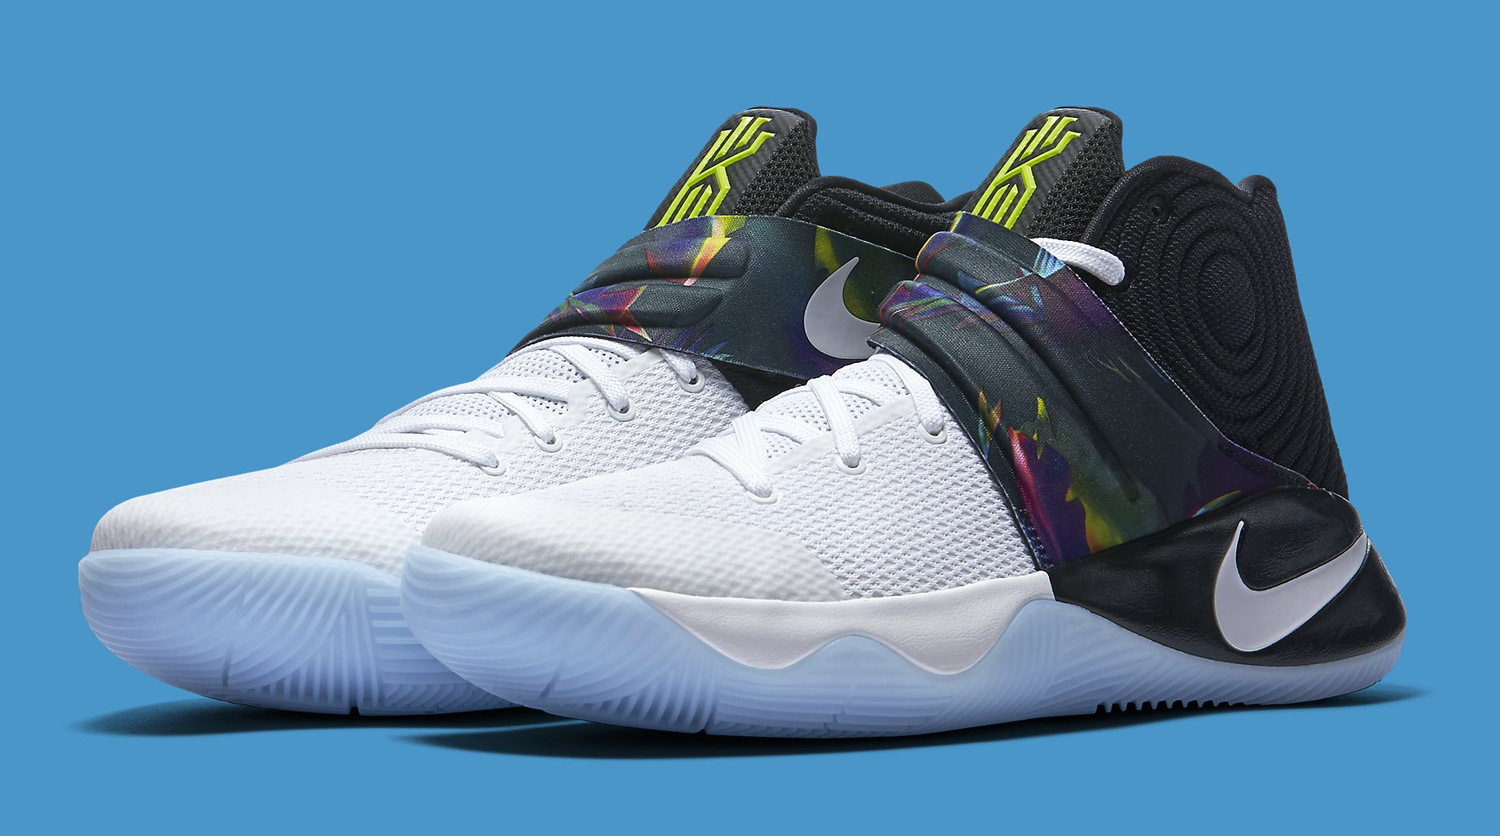 kyrie 2 2016 champs shoes